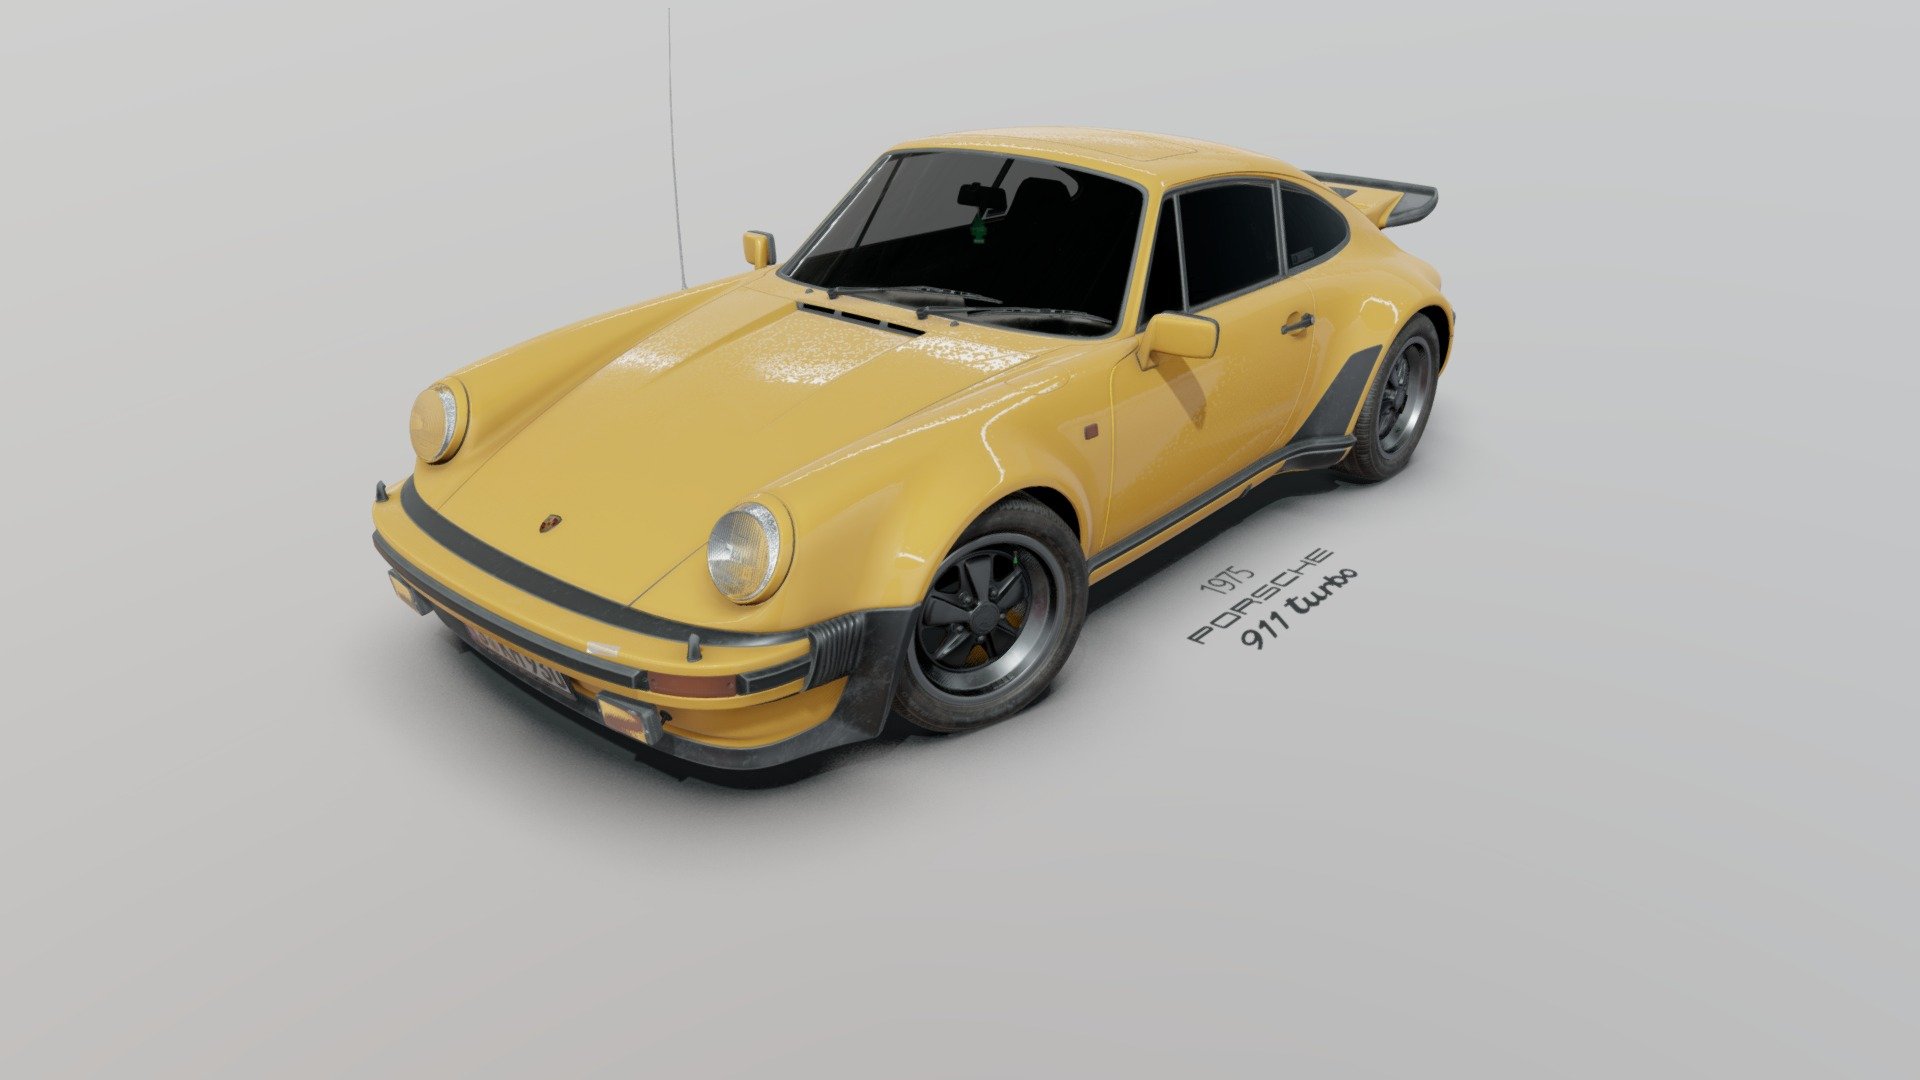 This work is based on &ldquo;FREE 1975 Porsche 911 (930) Turbo